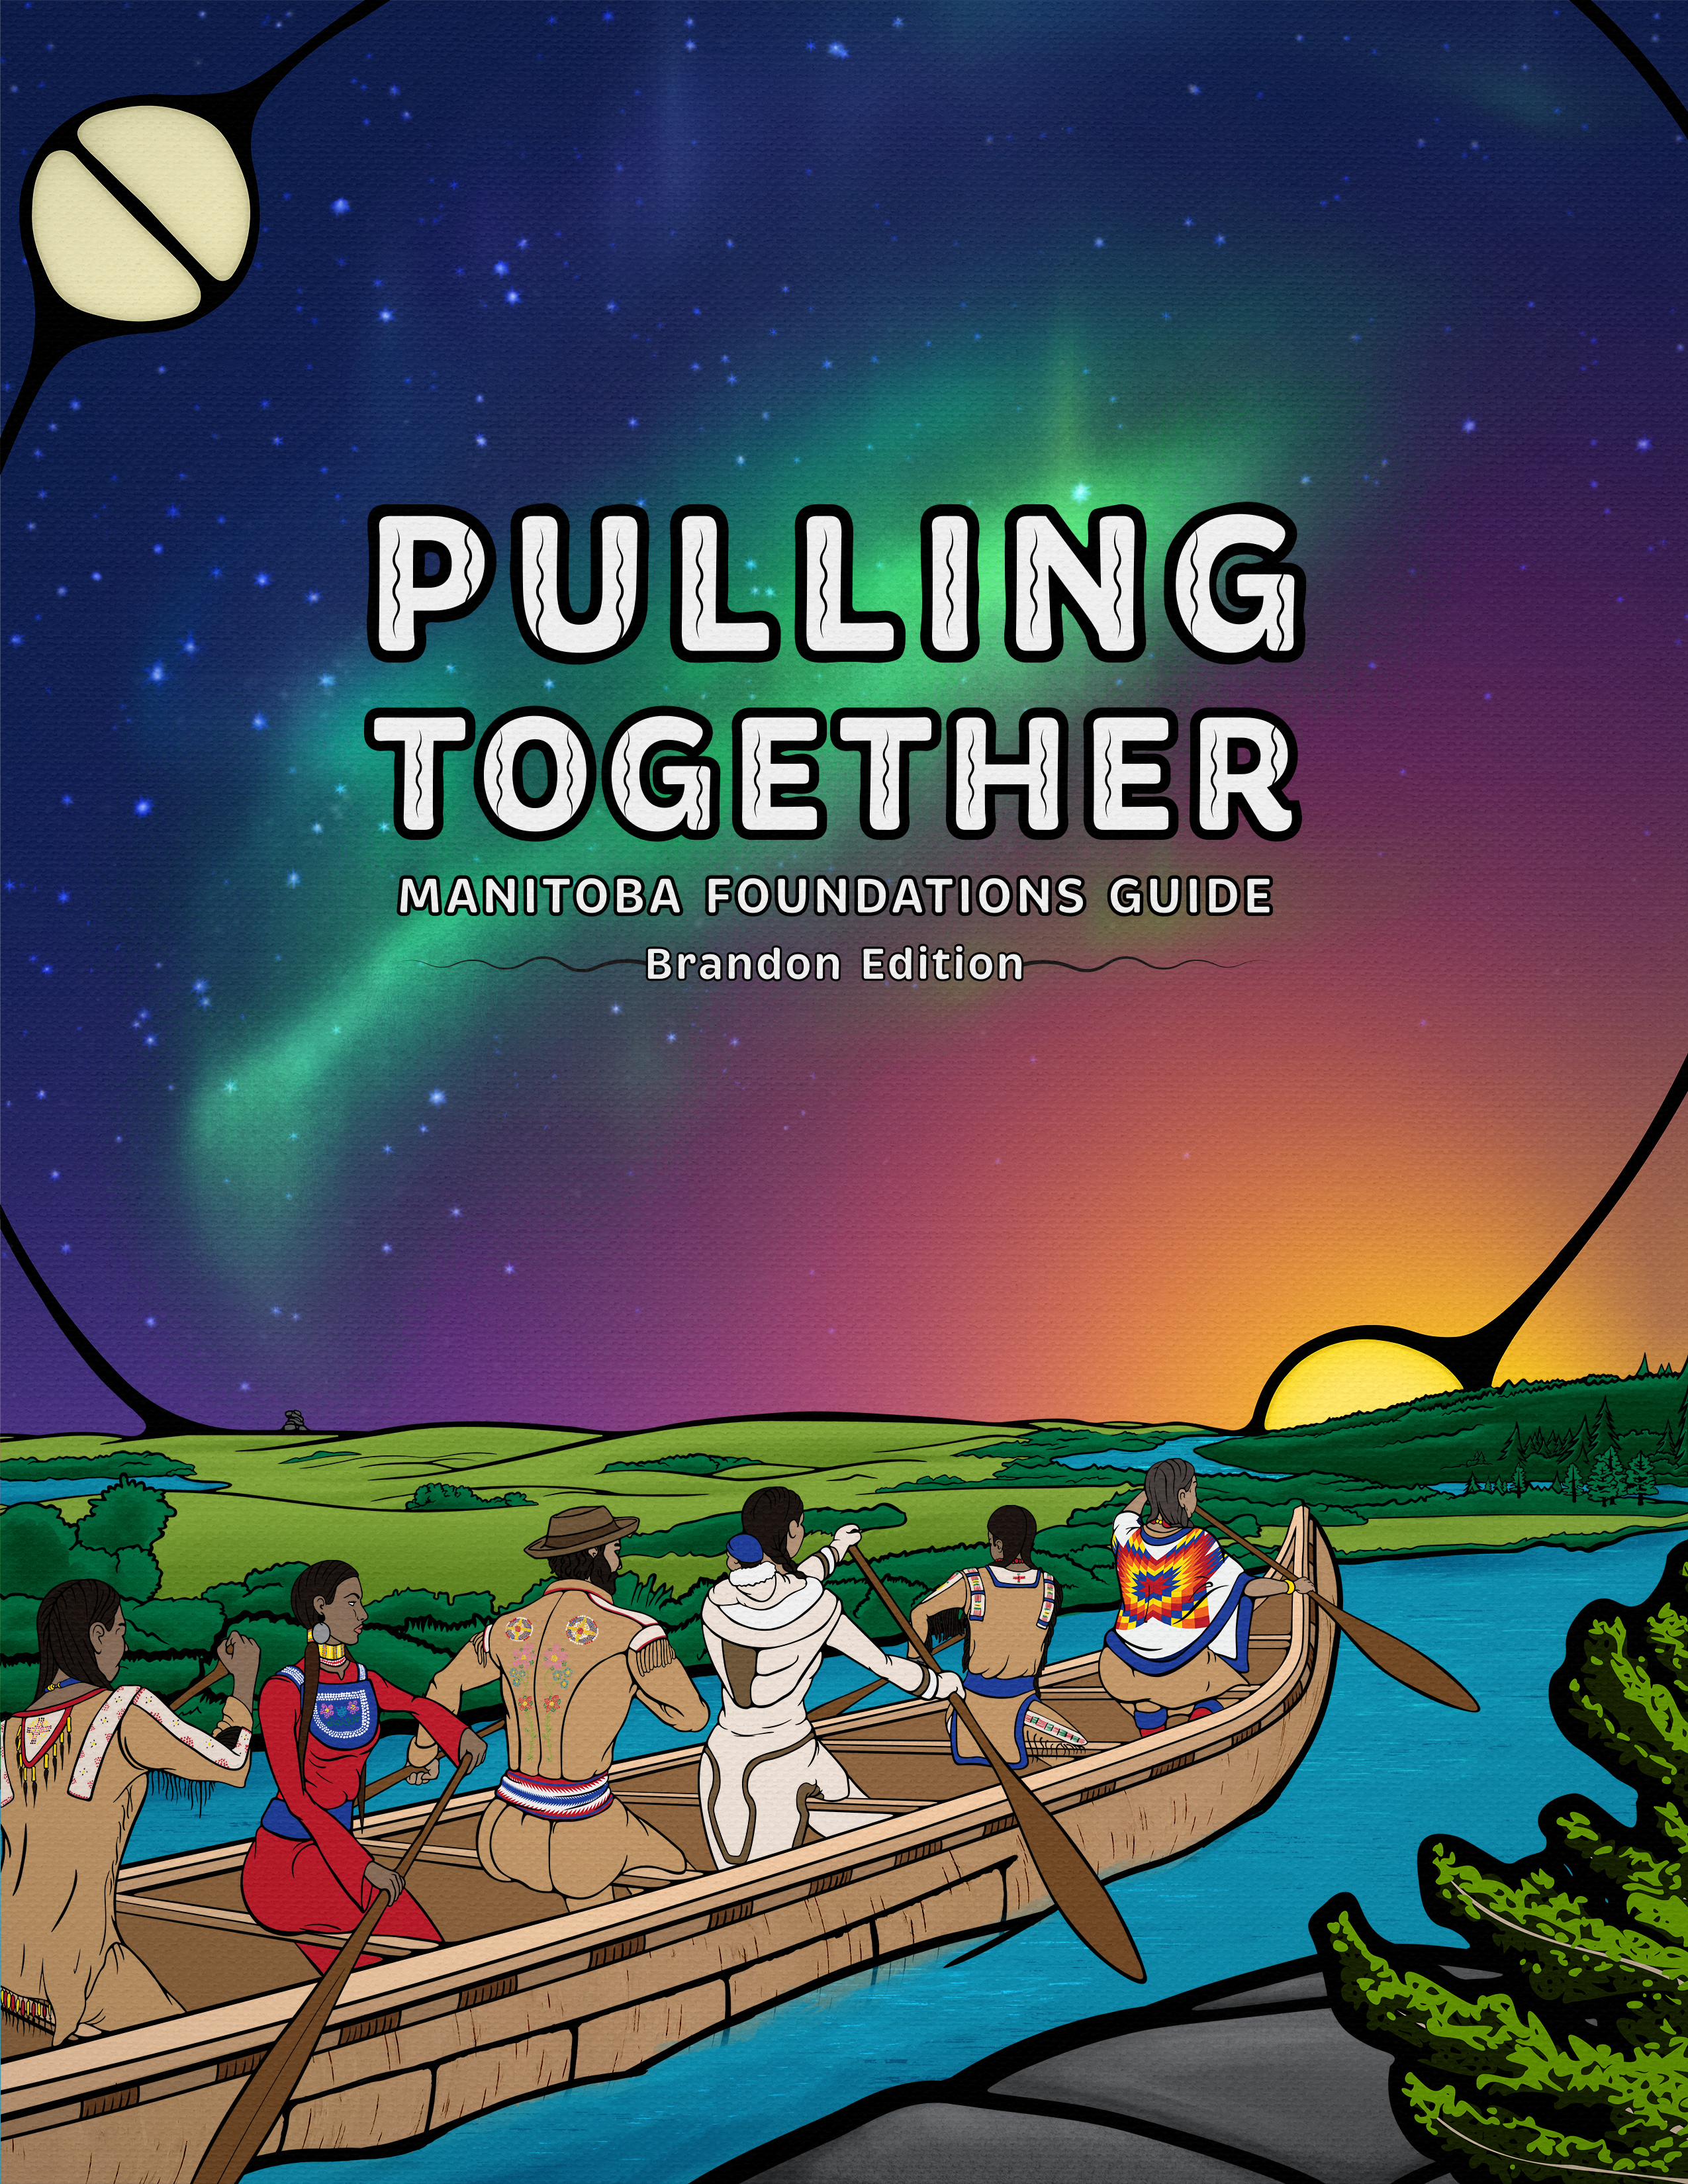 6 people canoeing northeast in a river in front of a sunset. On top left of image is the moon and bottom right is the sun. White text in middle reads "Pulling Together Manitoba Foundations Guide Brandon Edition"